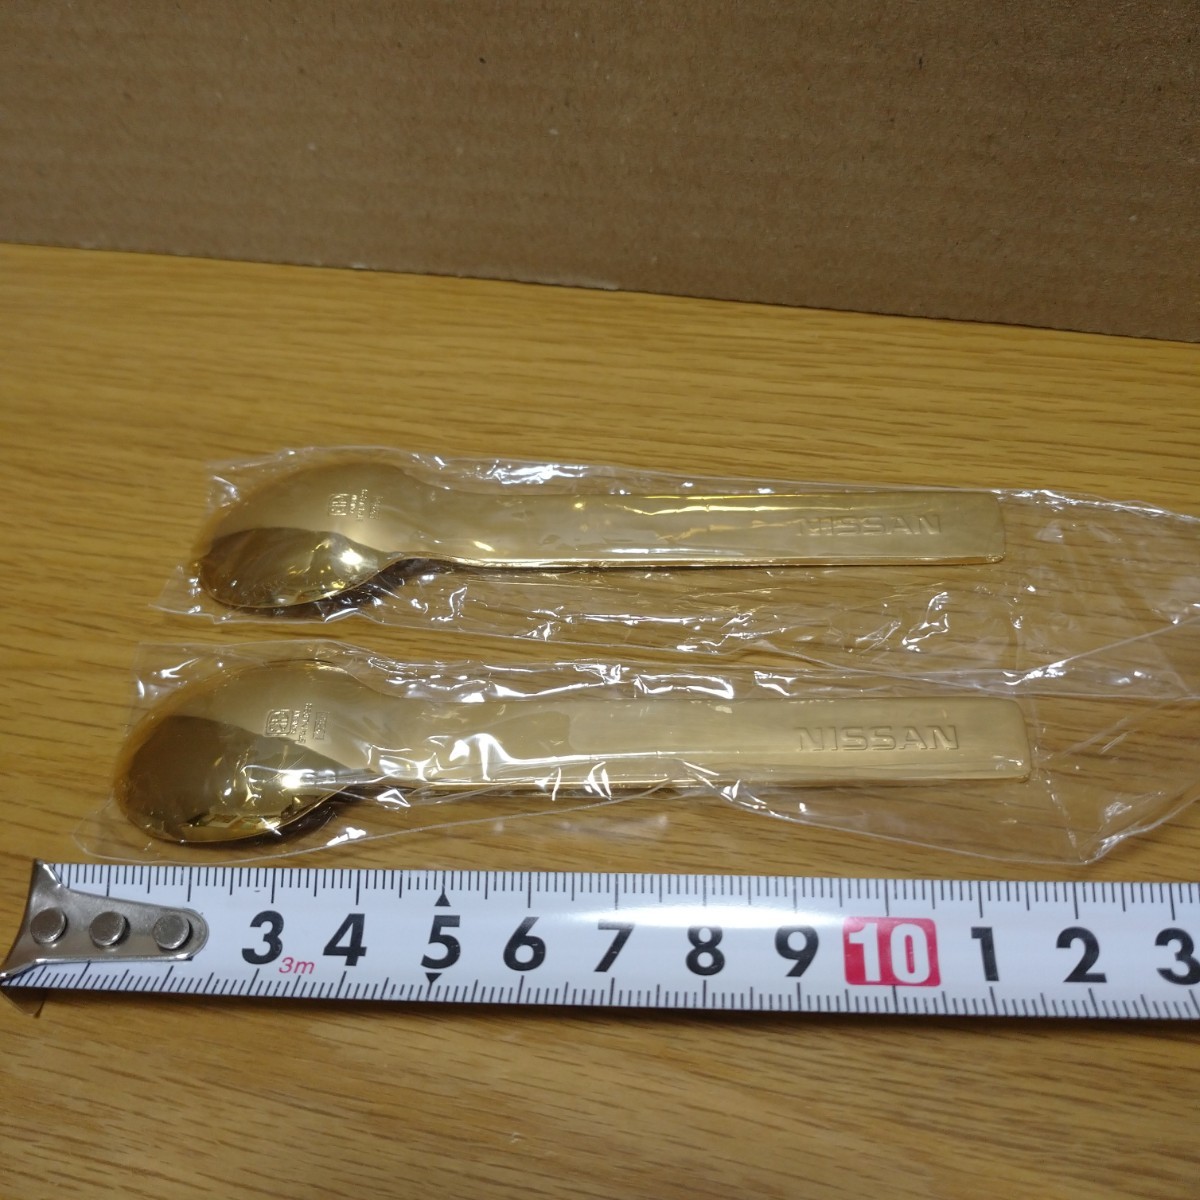 NISSAN stainless ステンレス スプーン セット グッズ コレクション 金色 日産 ロゴ 非売品 ノベルティ 限定 spoon collection GOLD ①_画像6